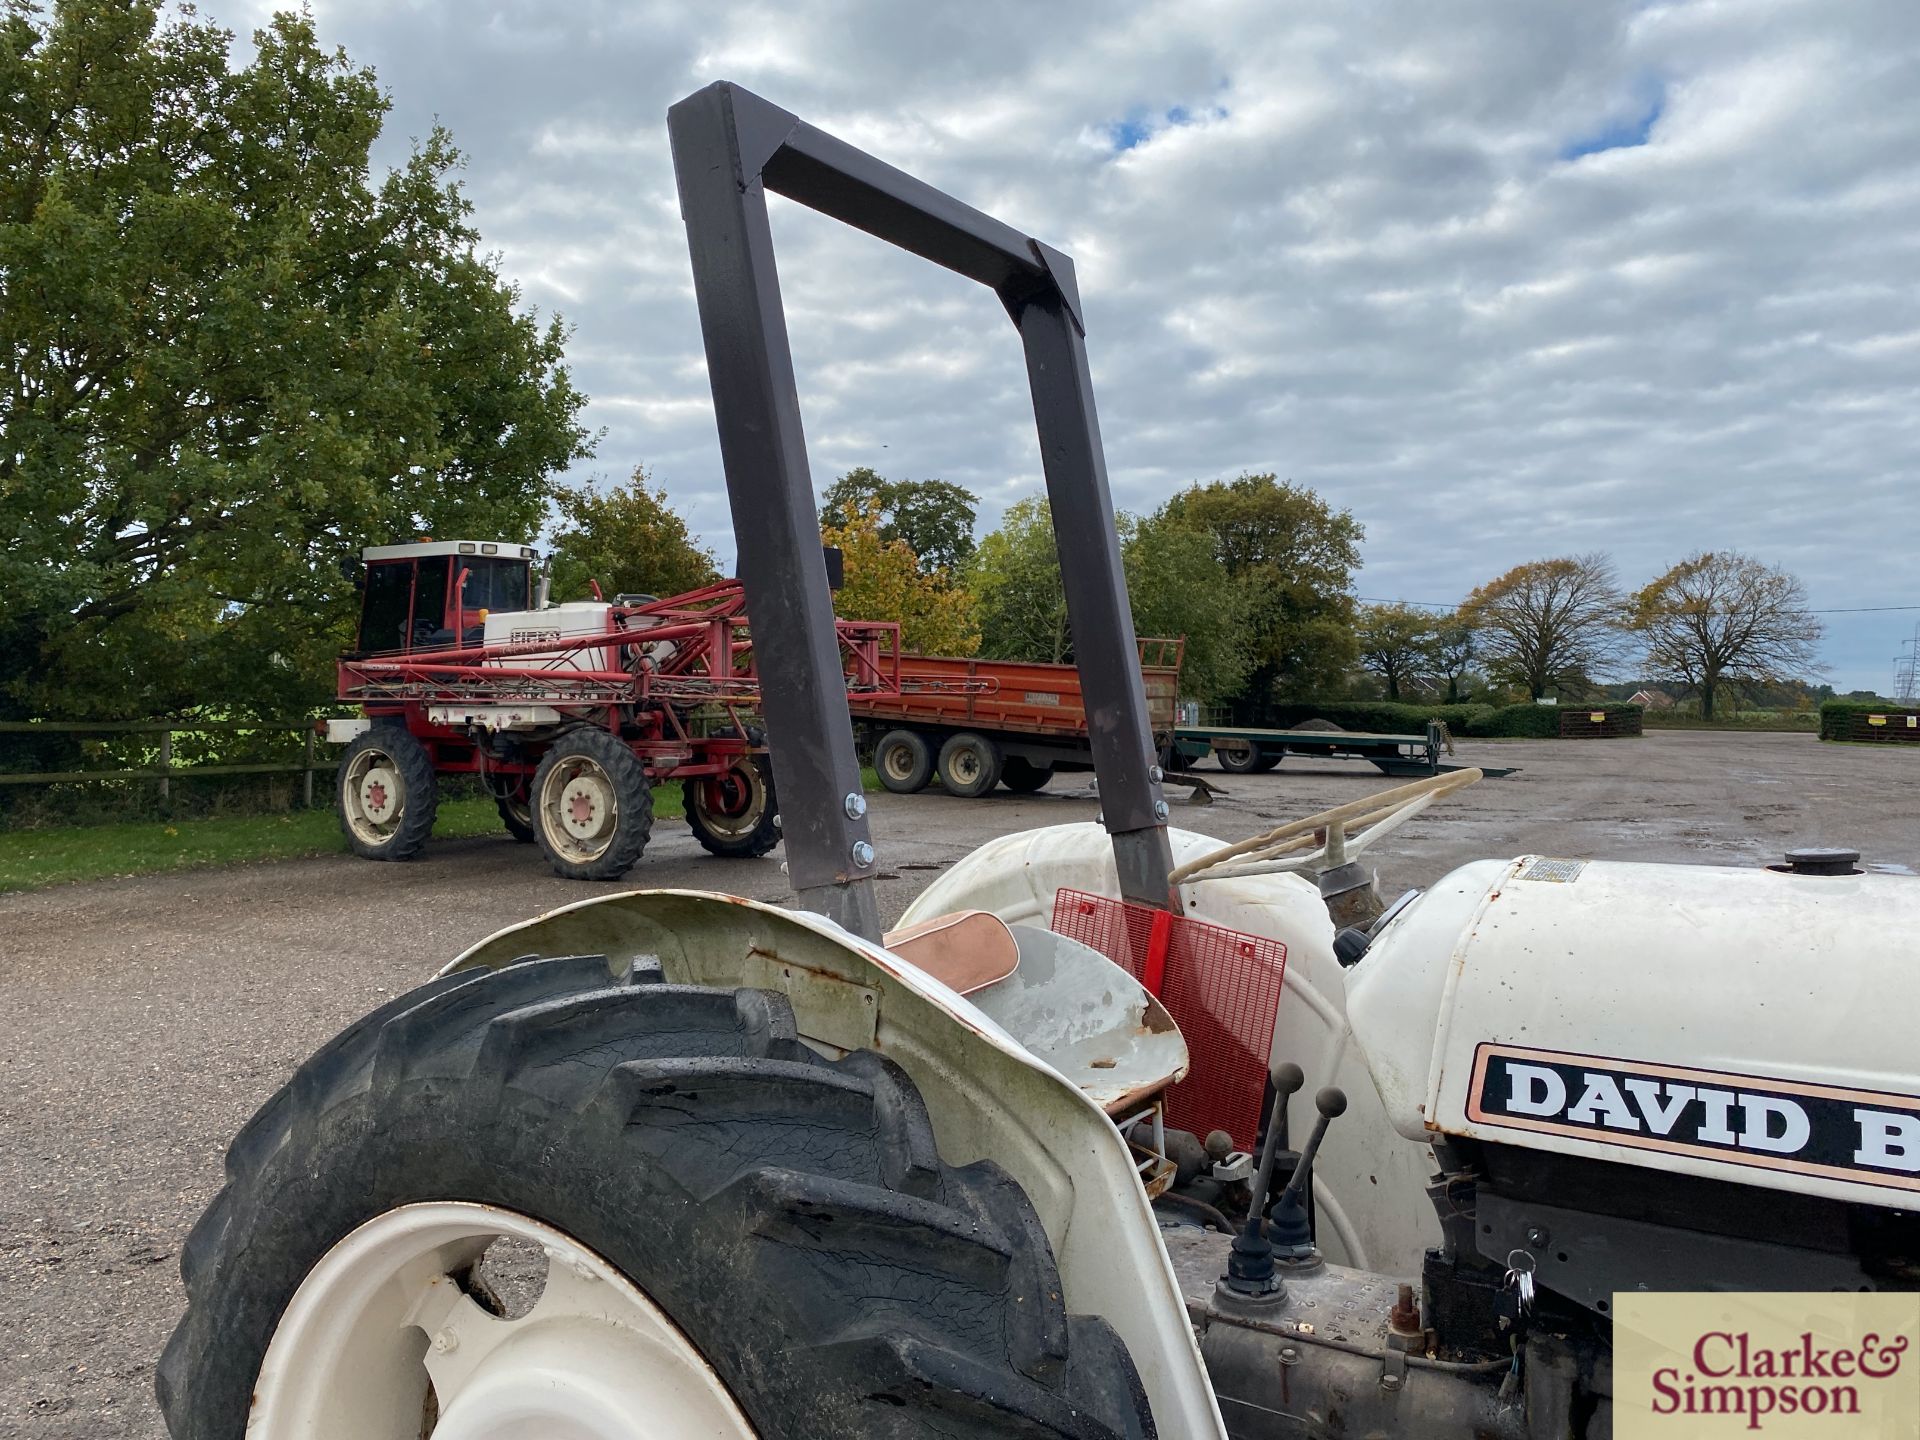 David Brown 990 Selectamatic 2WD tractor. Registration DUE 781D (no paperwork). Serial number 990A/ - Image 15 of 31